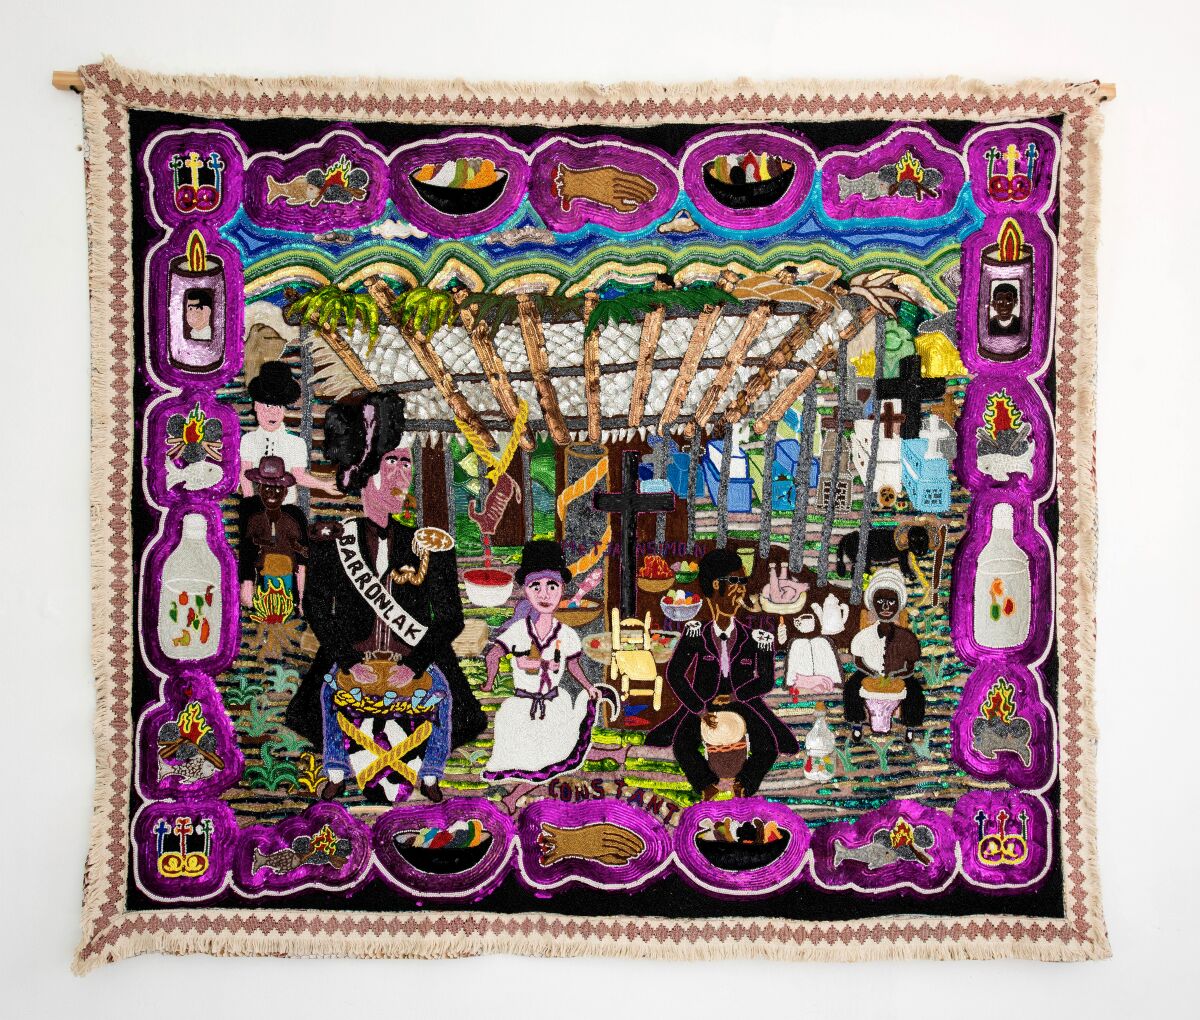 A brilliant tapestry showing a celebratory scene in a village is trimmed in sparkling elements in purple.